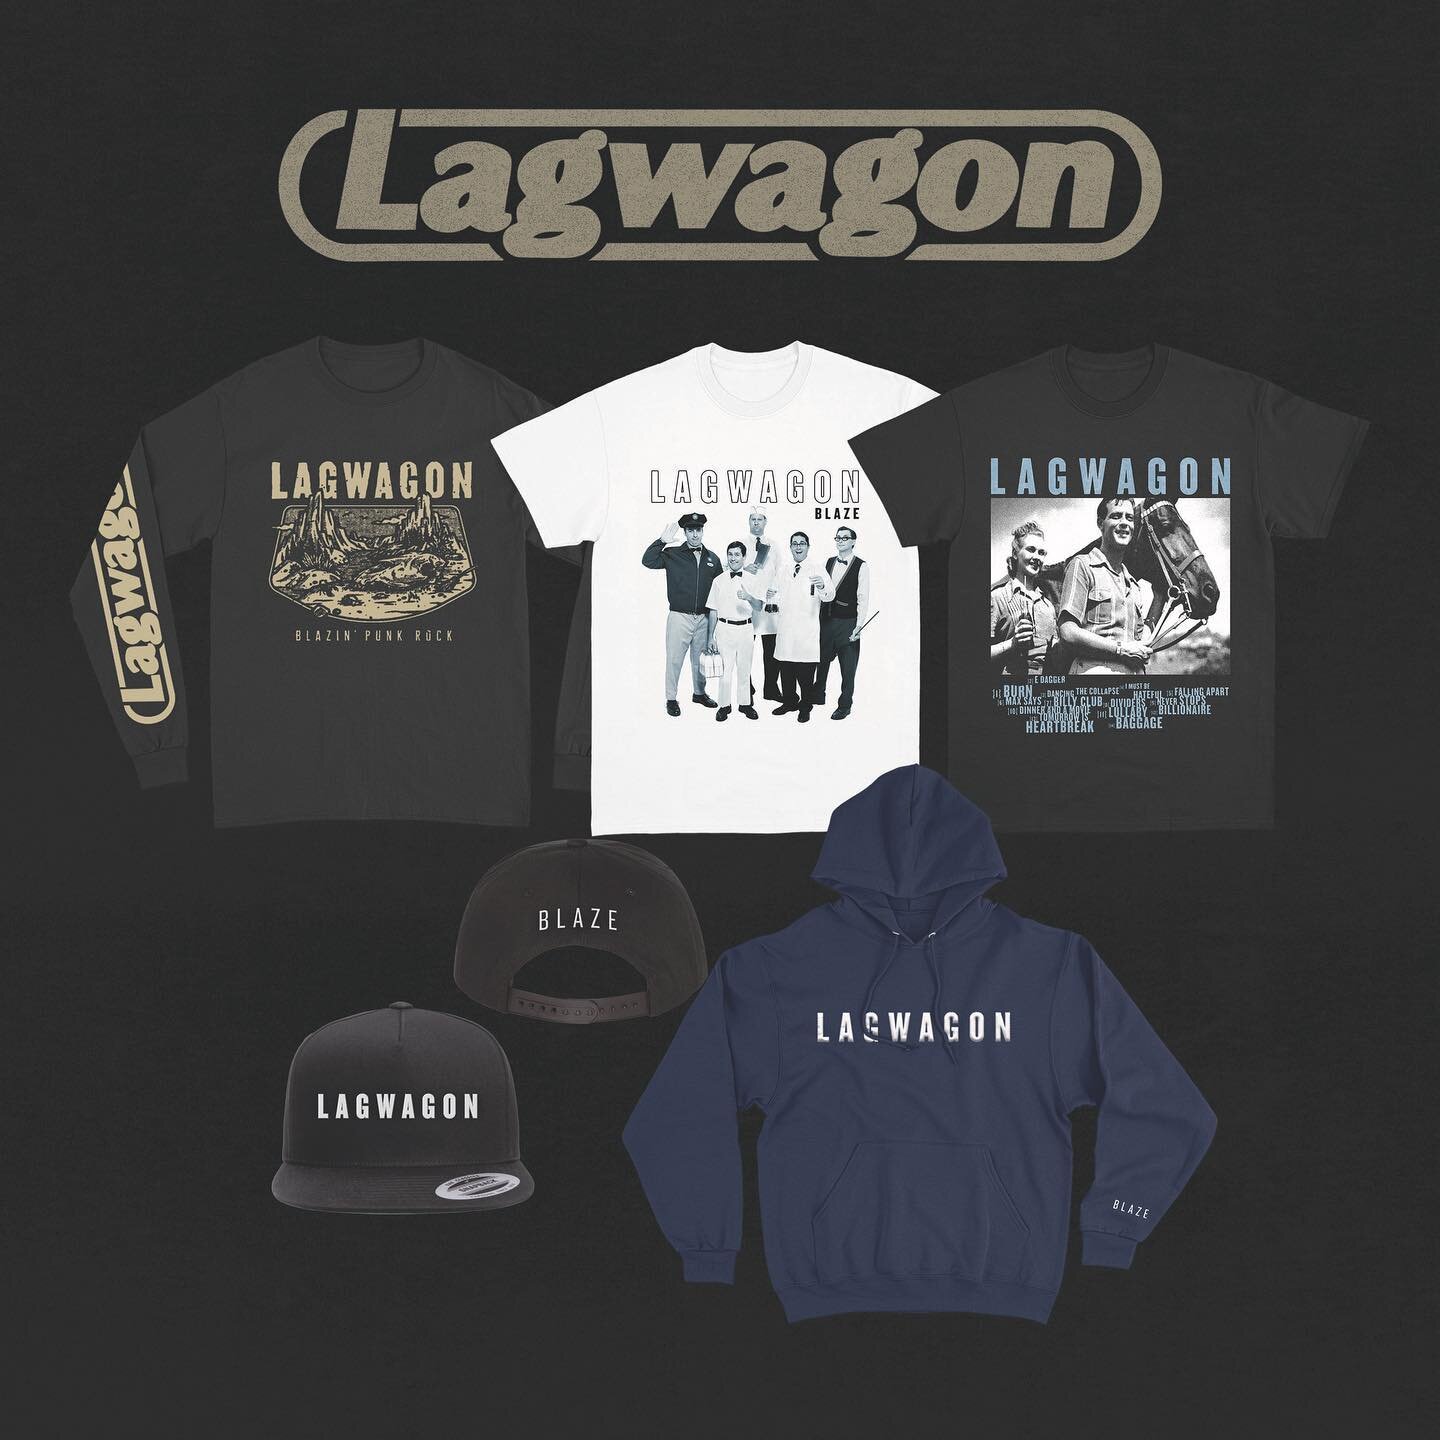 Happy Birthday to our album Blaze! 🎉🎉🎉 20 years ago we released Blaze into the world, so to celebrate this momentous occasion we're dropping a very limited release of Blaze merch items. Visit our US store (https://us.lagwagon.com), don't sleep on 